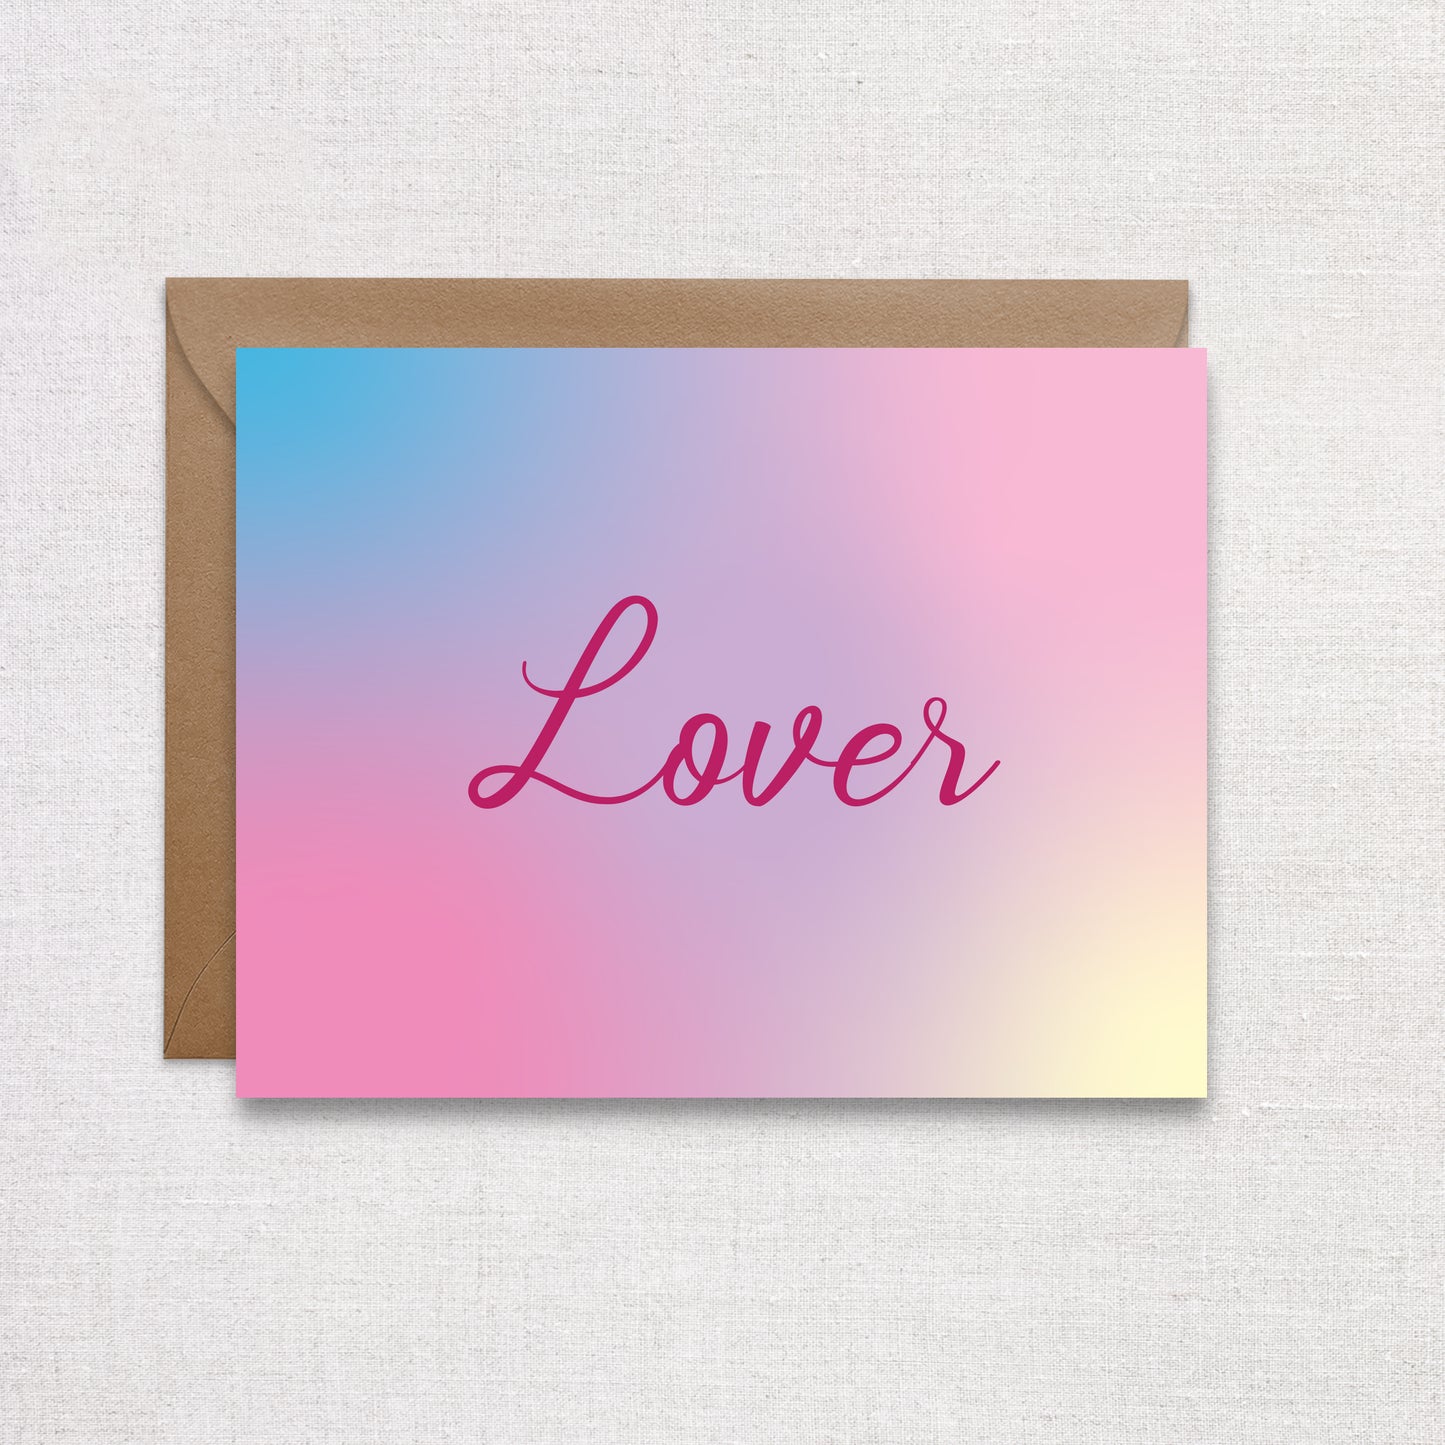 Lover Valentine's Day Card. Taylor Swift Inspired Greeting Card.